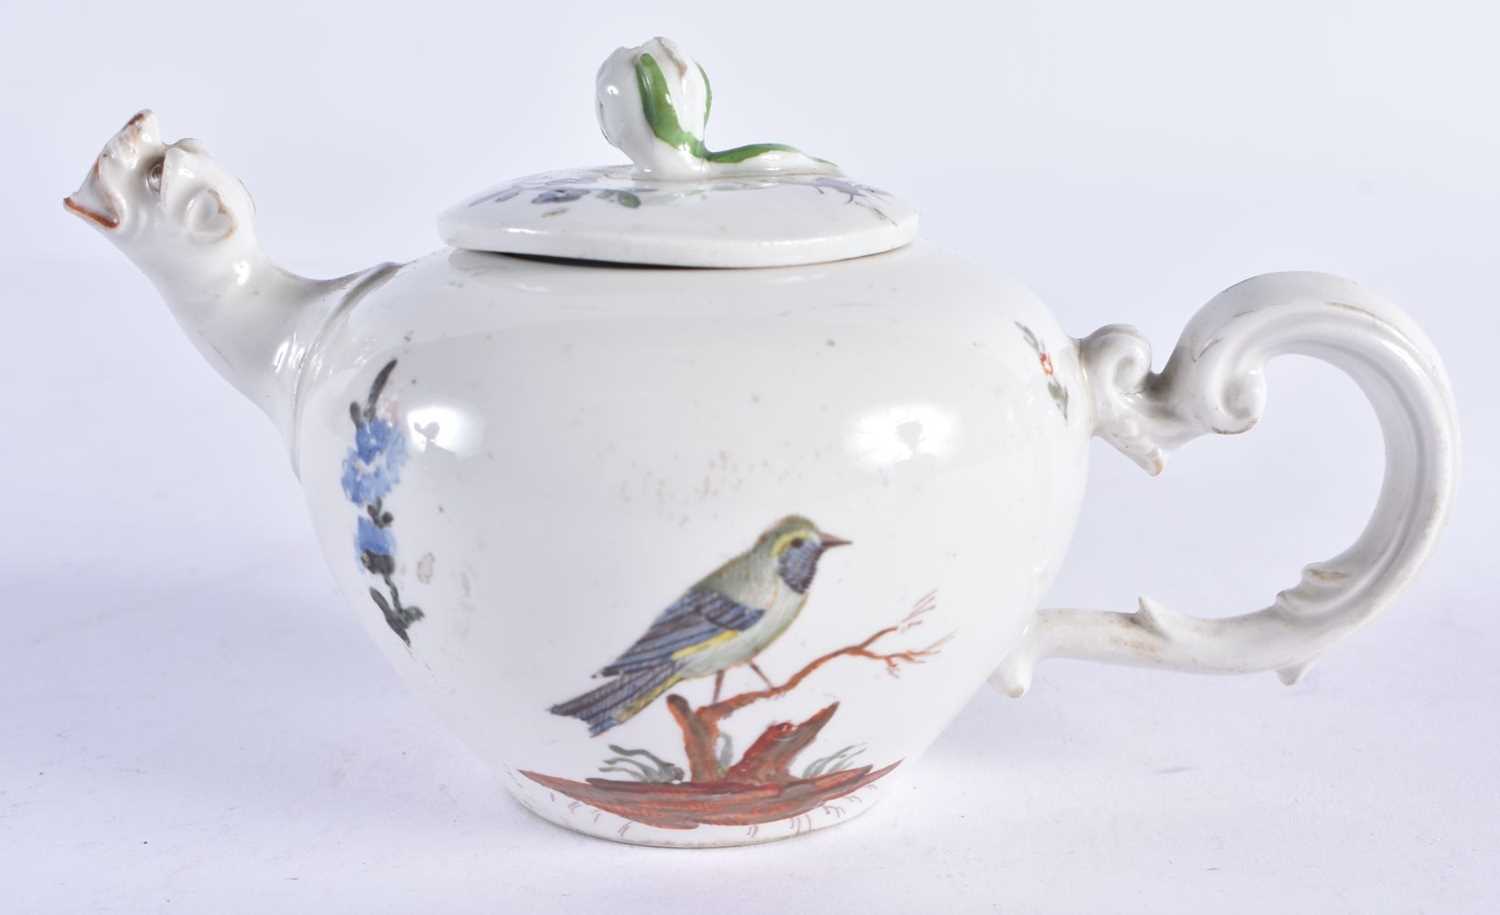 A RARE 18TH CENTURY GERMAN PORCELAIN BULLET FORM TEAPOT AND COVER painted in the Meissen style